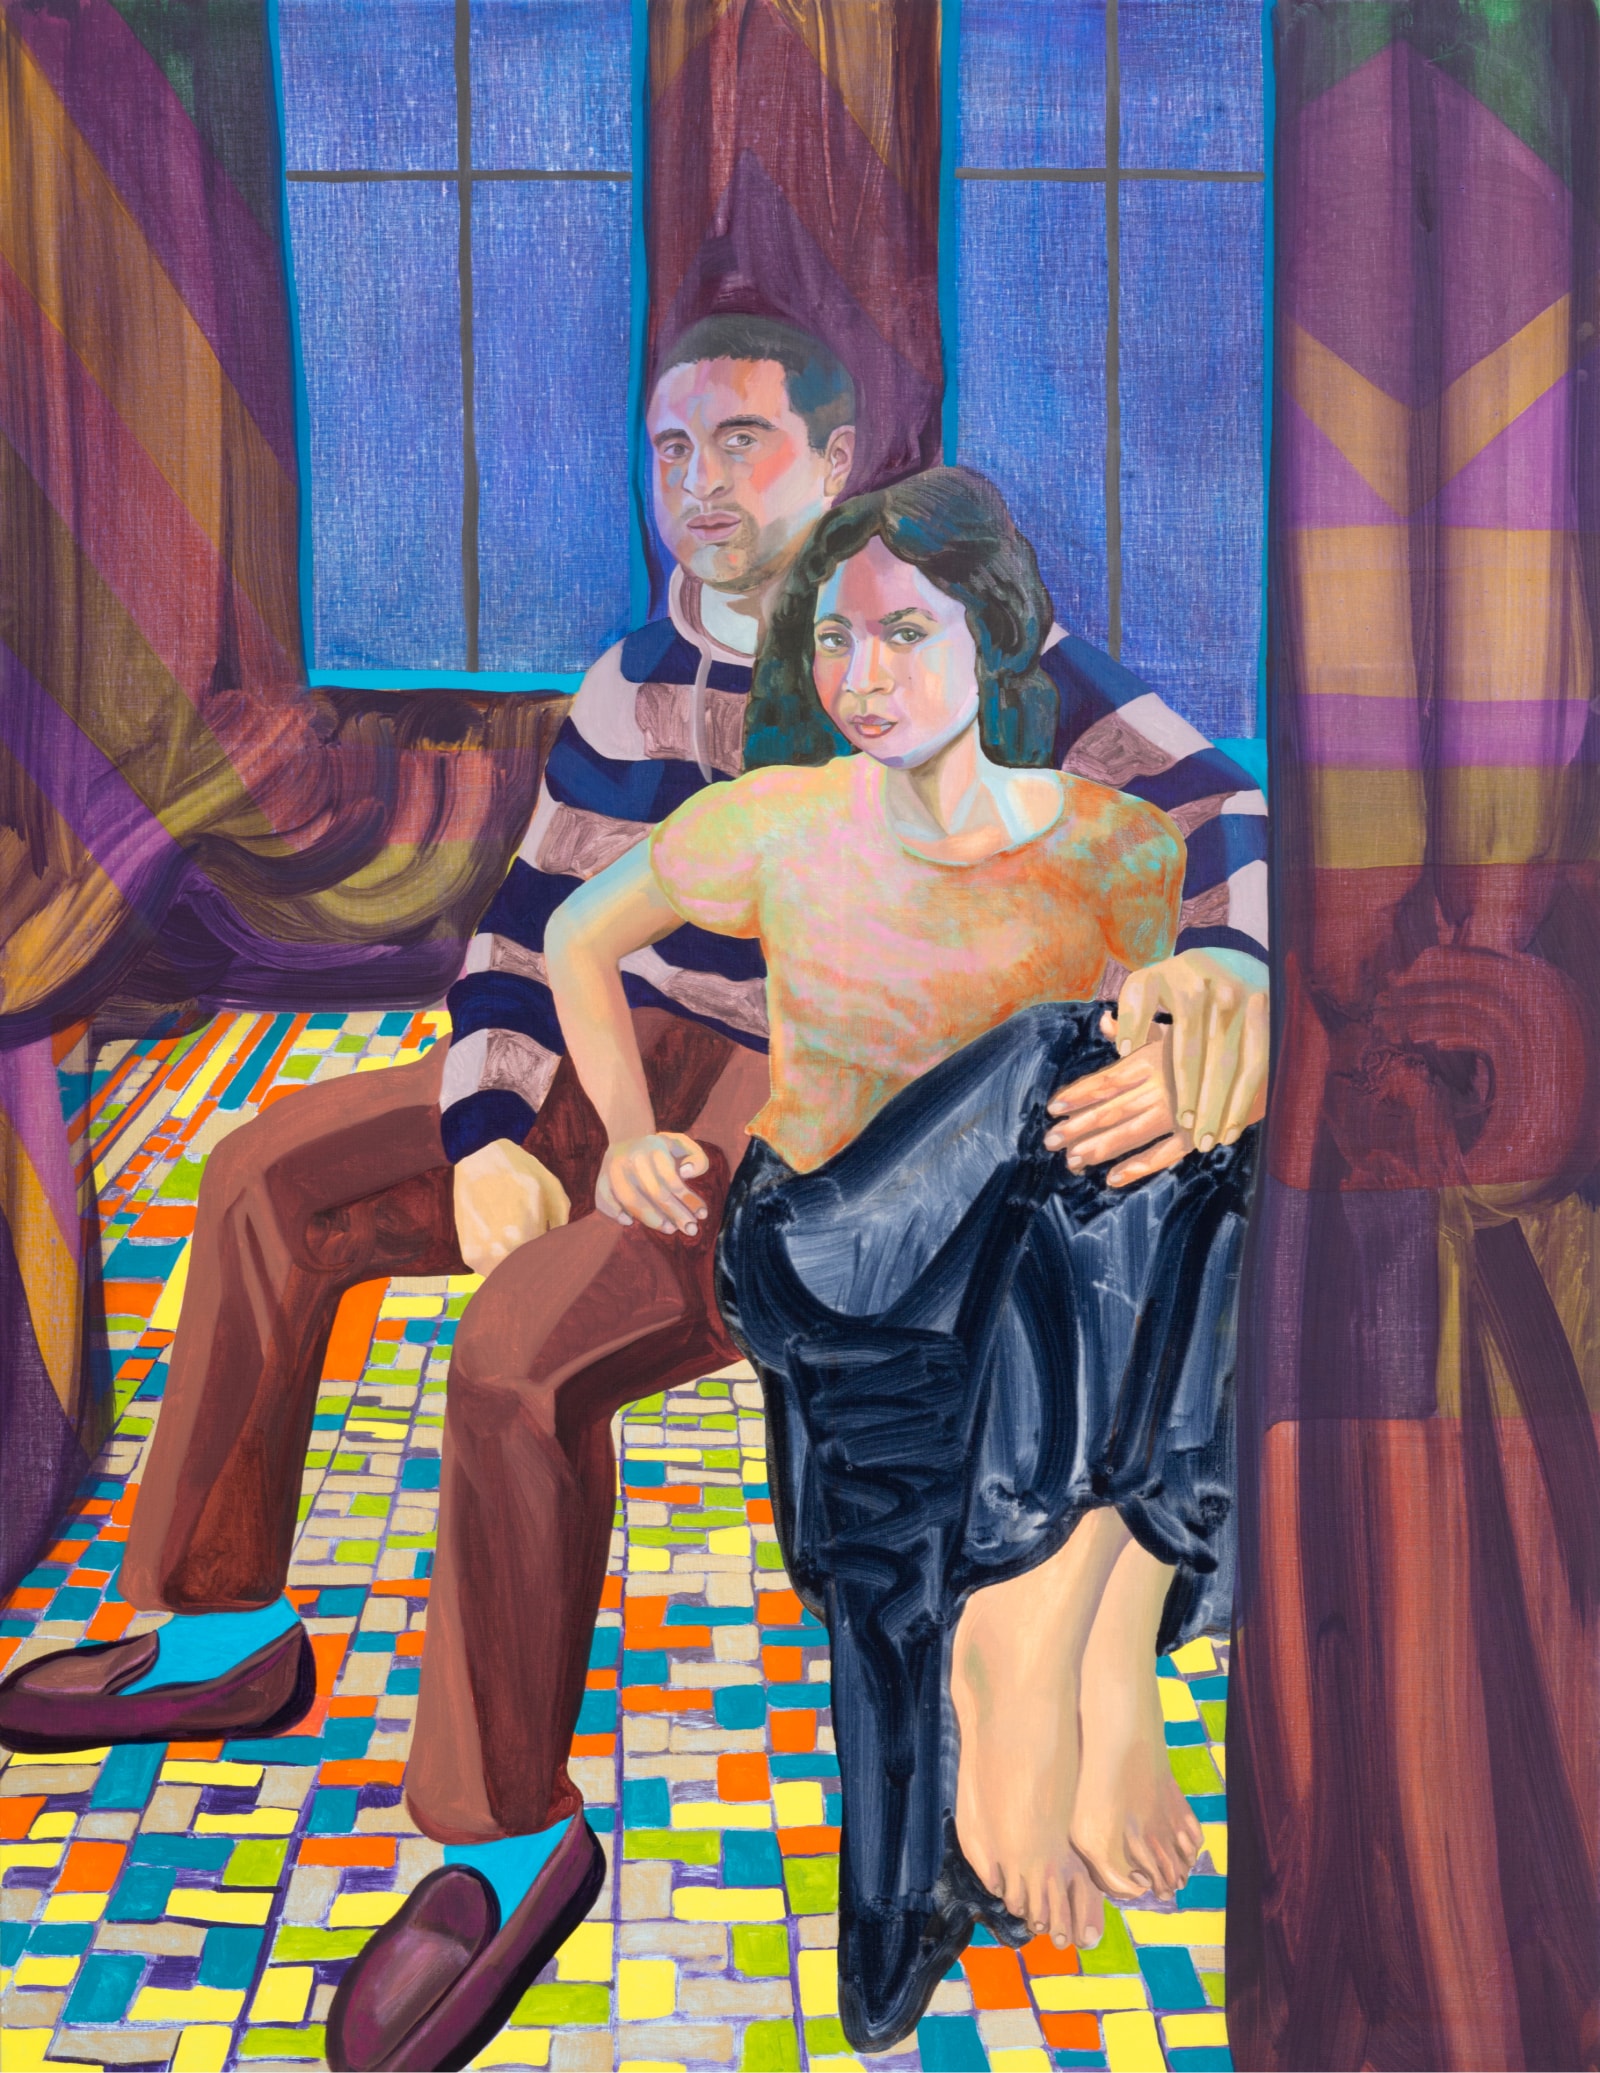 Artwork featuring a woman seated against a man in a half-embrace, framed by patterned curtains